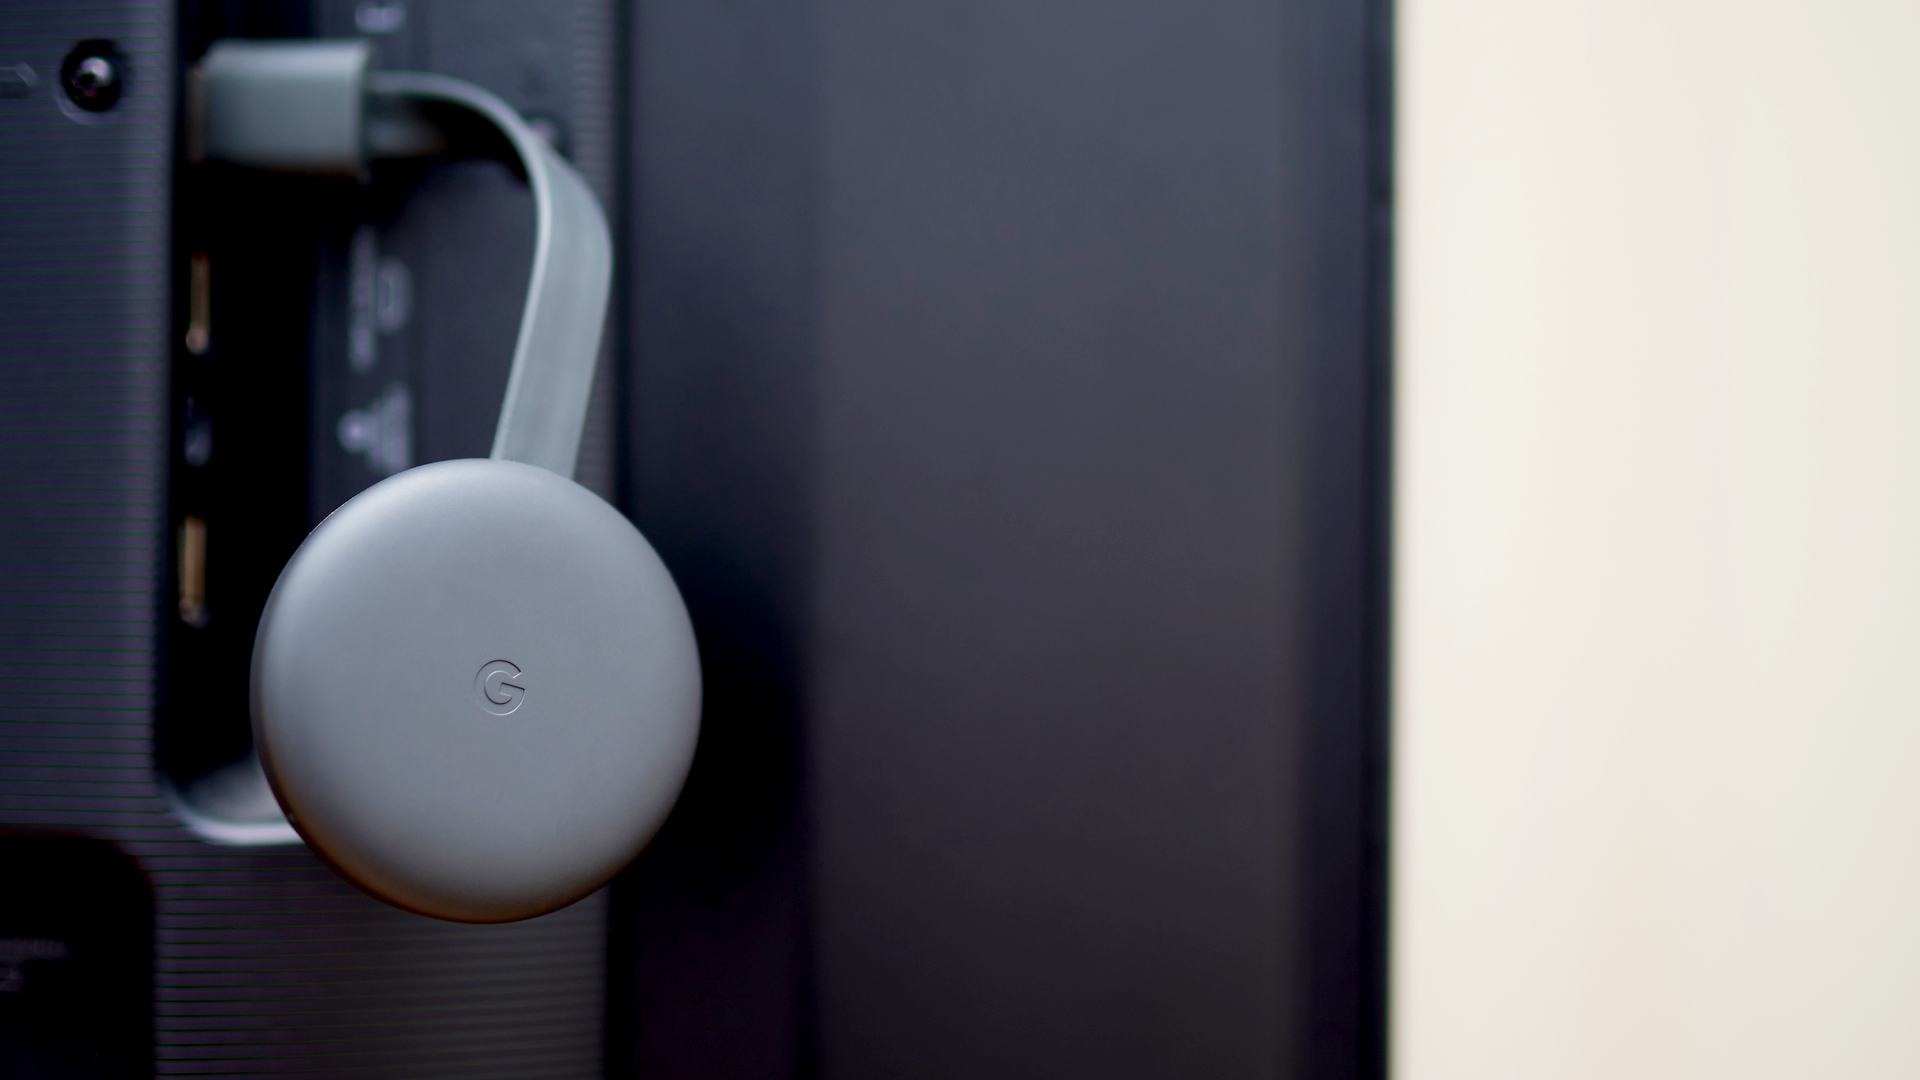 What is Google Chromecast, and how does it work?